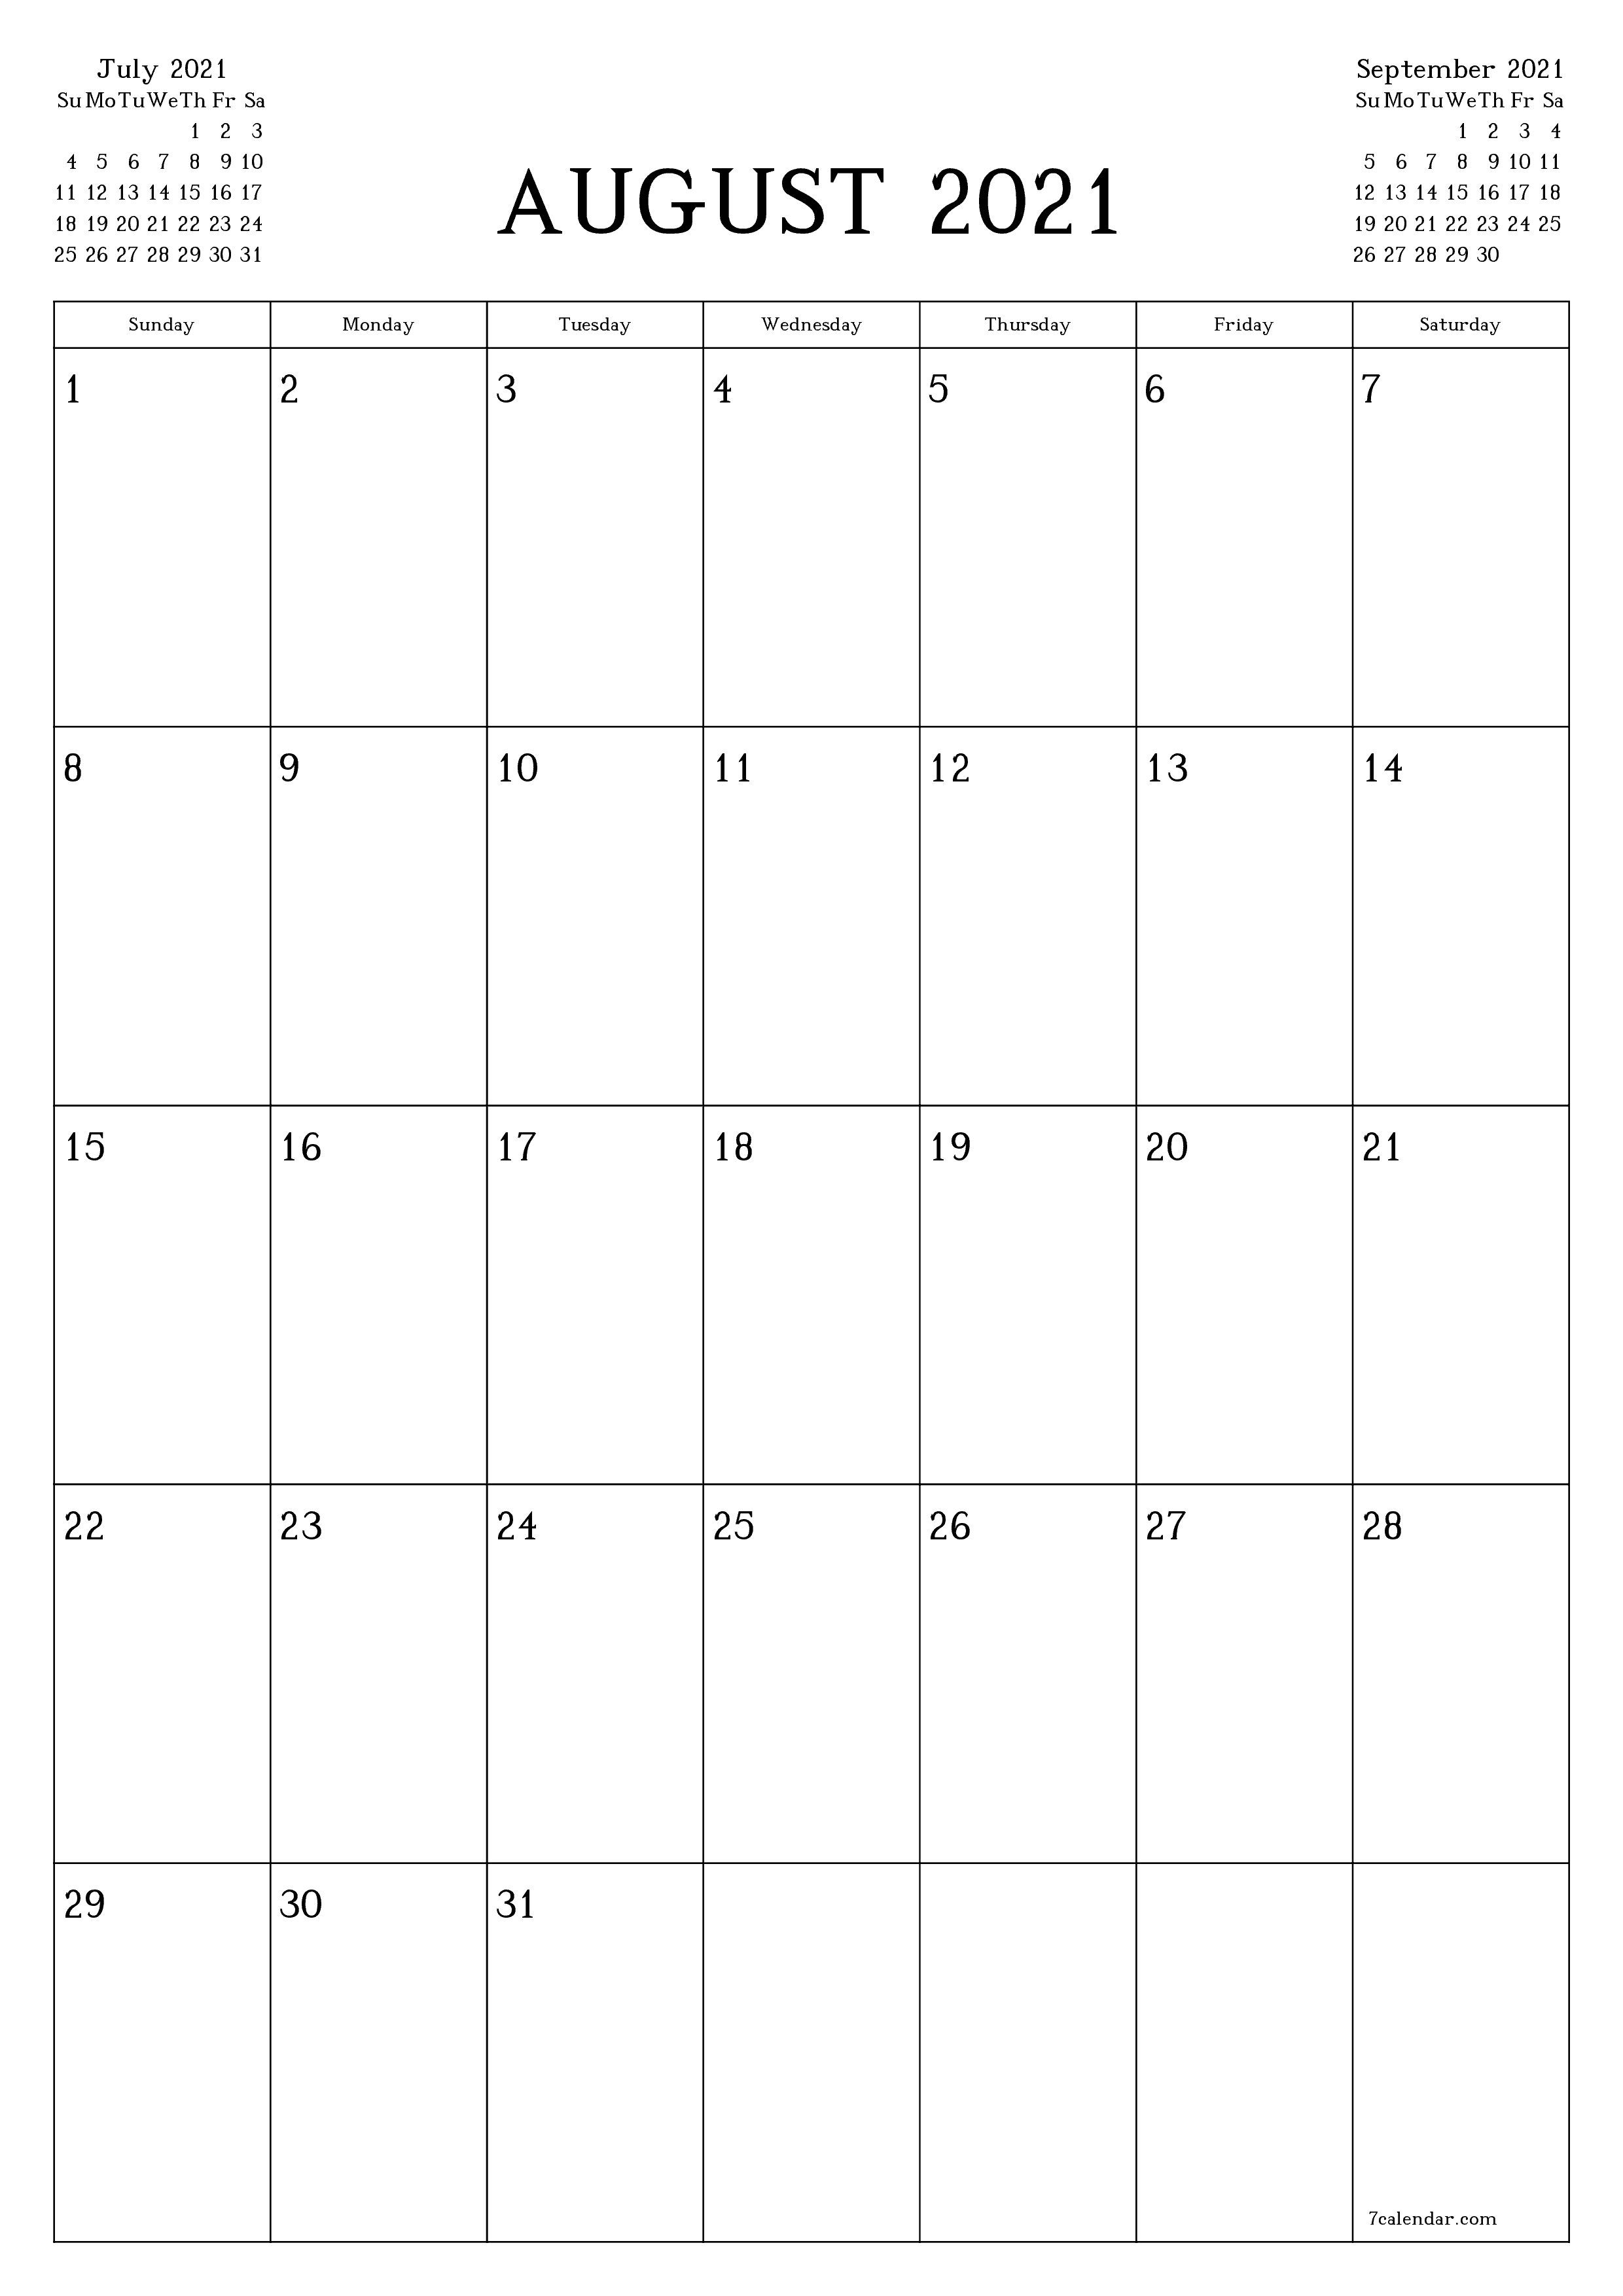 Blank monthly calendar planner for month August 2021 with notes save and print to PDF PNG English - 7calendar.com